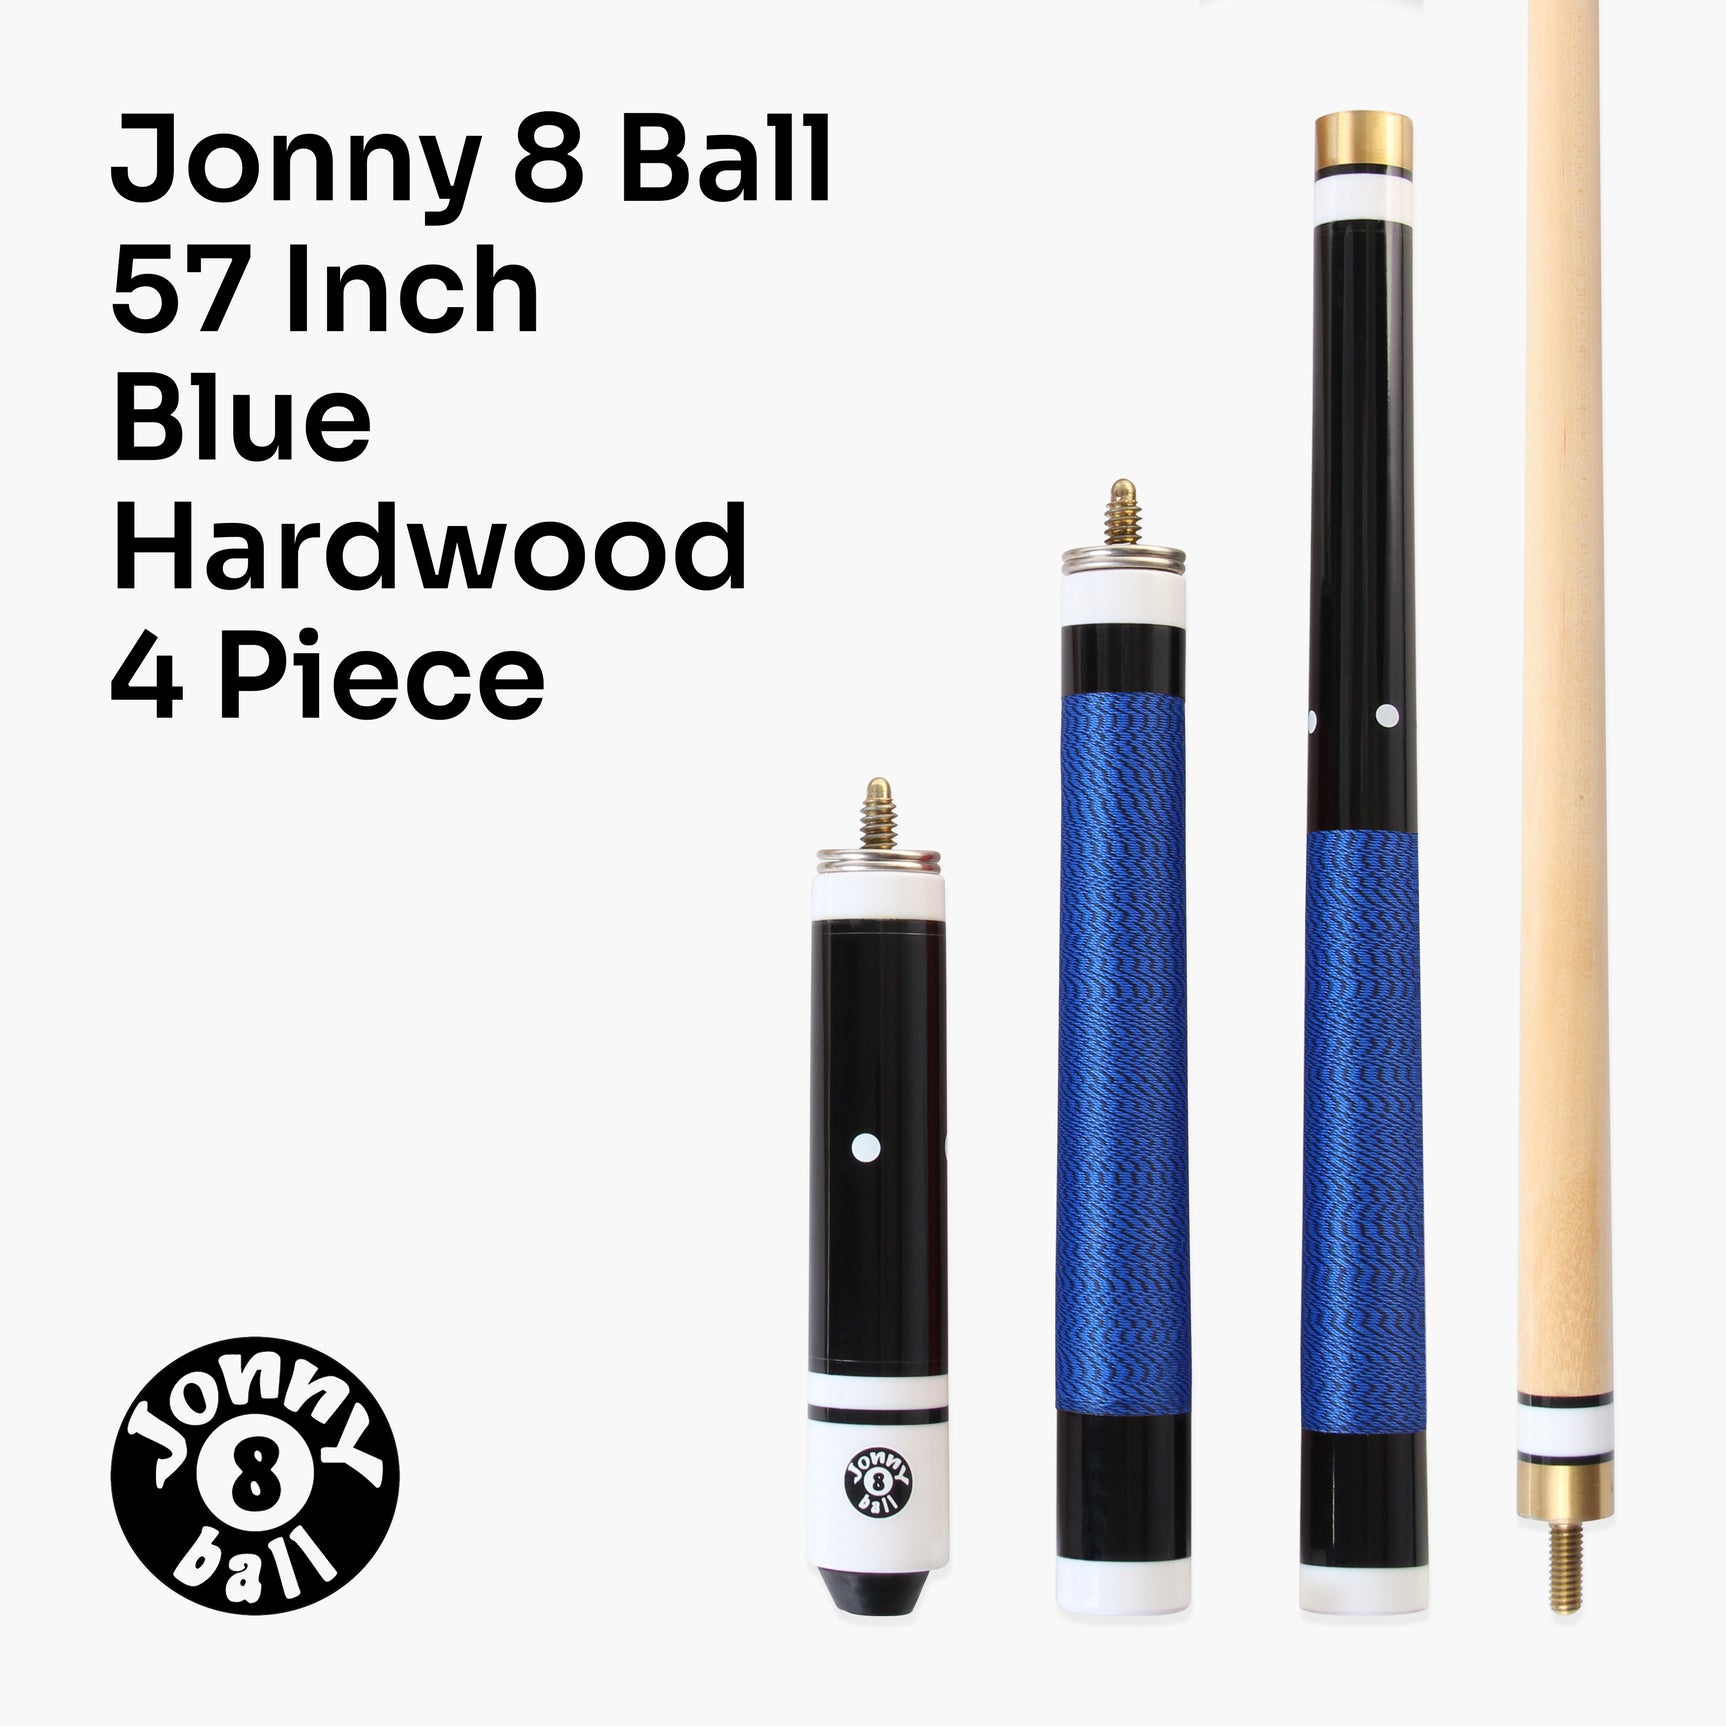 Jonny 8 Ball 4 Piece Hardwood Adjustable Snooker Pool Cue and SOFT CASE Set with 4 x 11mm Spare Tips